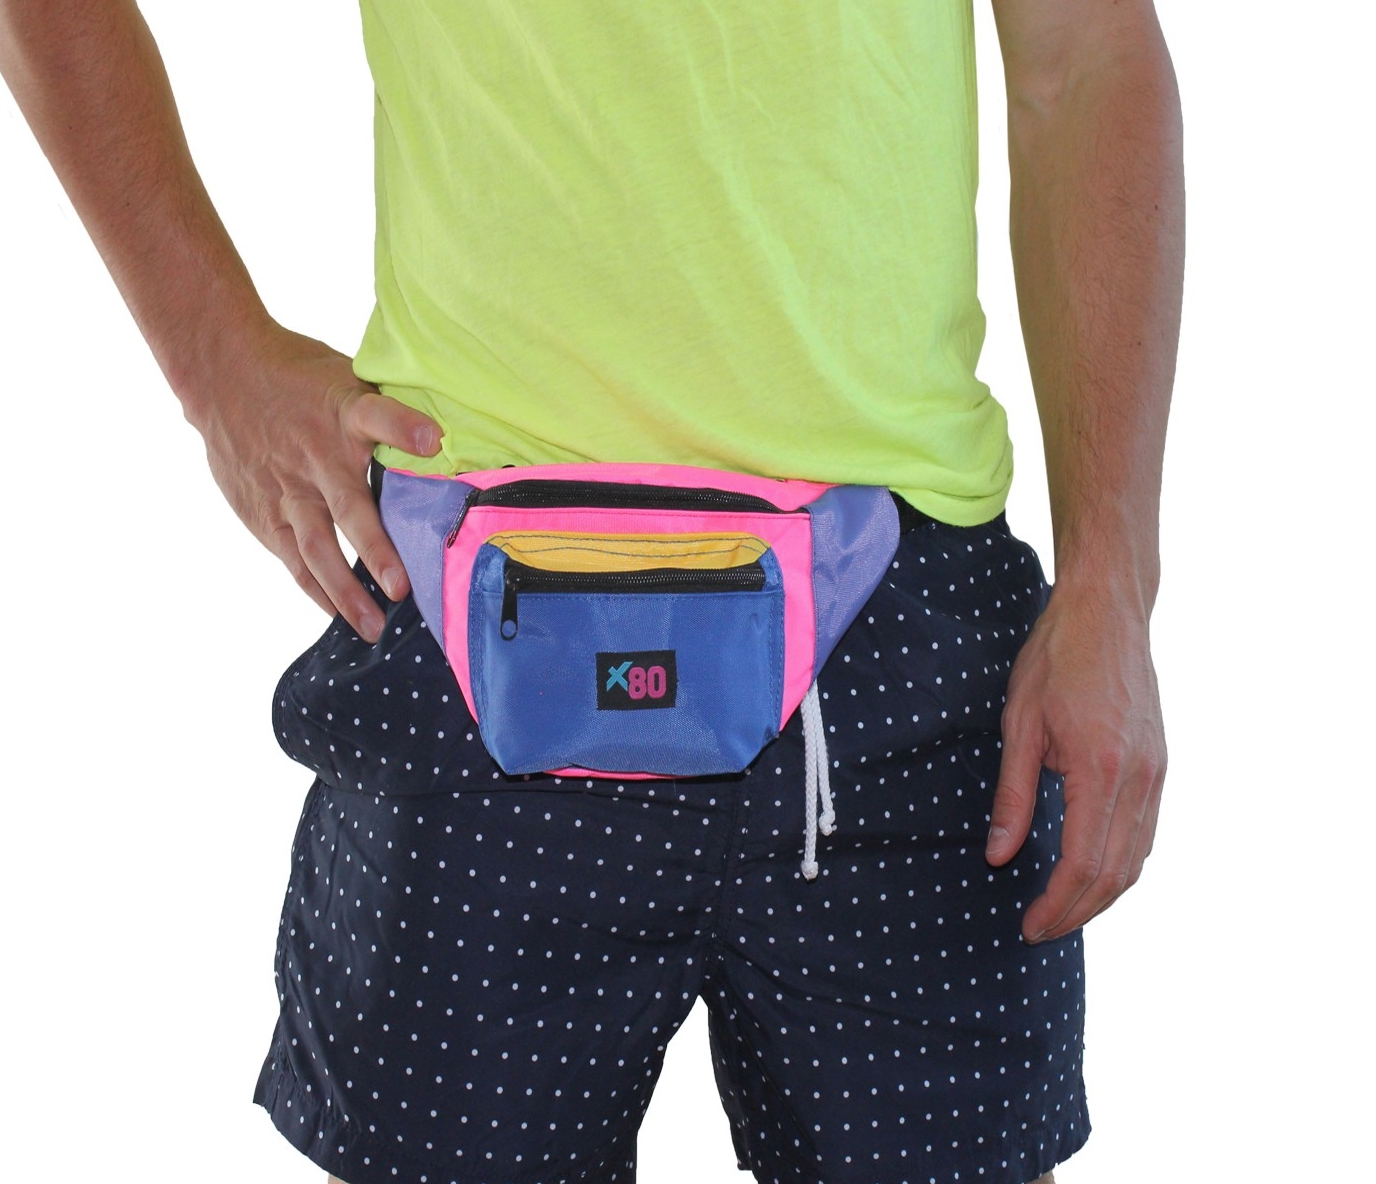 It was the 80s, and my fanny pack and I were down with the ladies